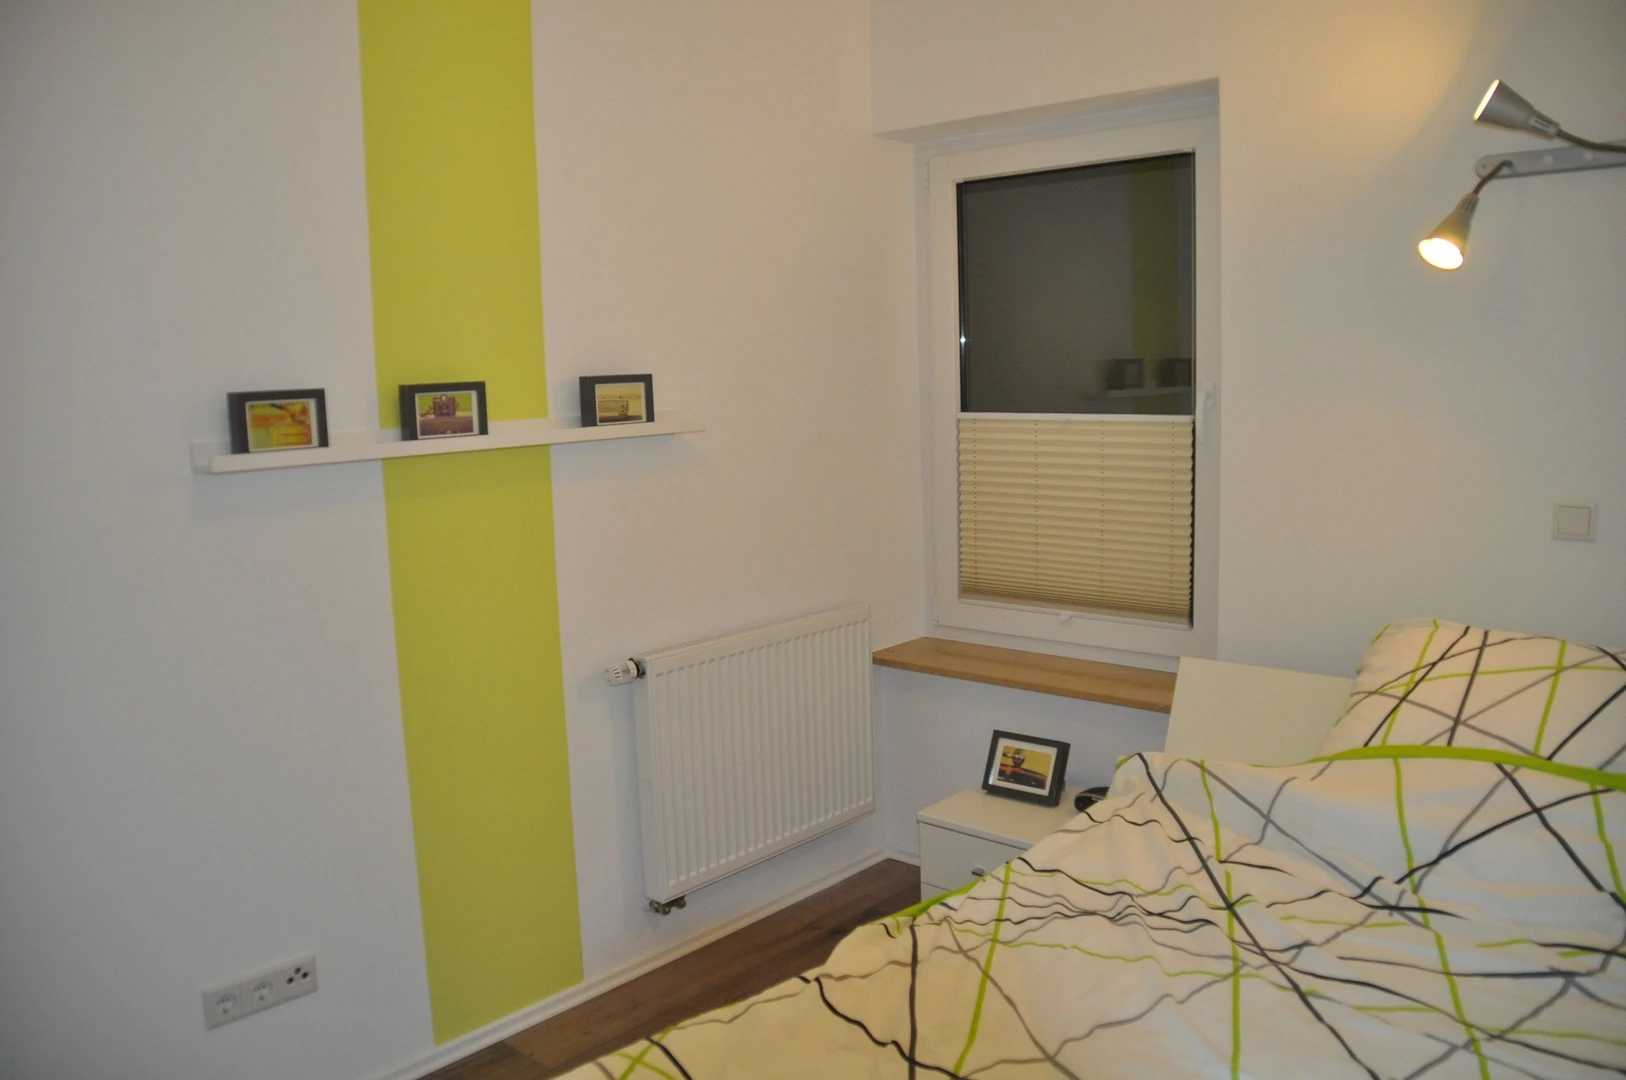 Renting rooms by the month in Bielefeld